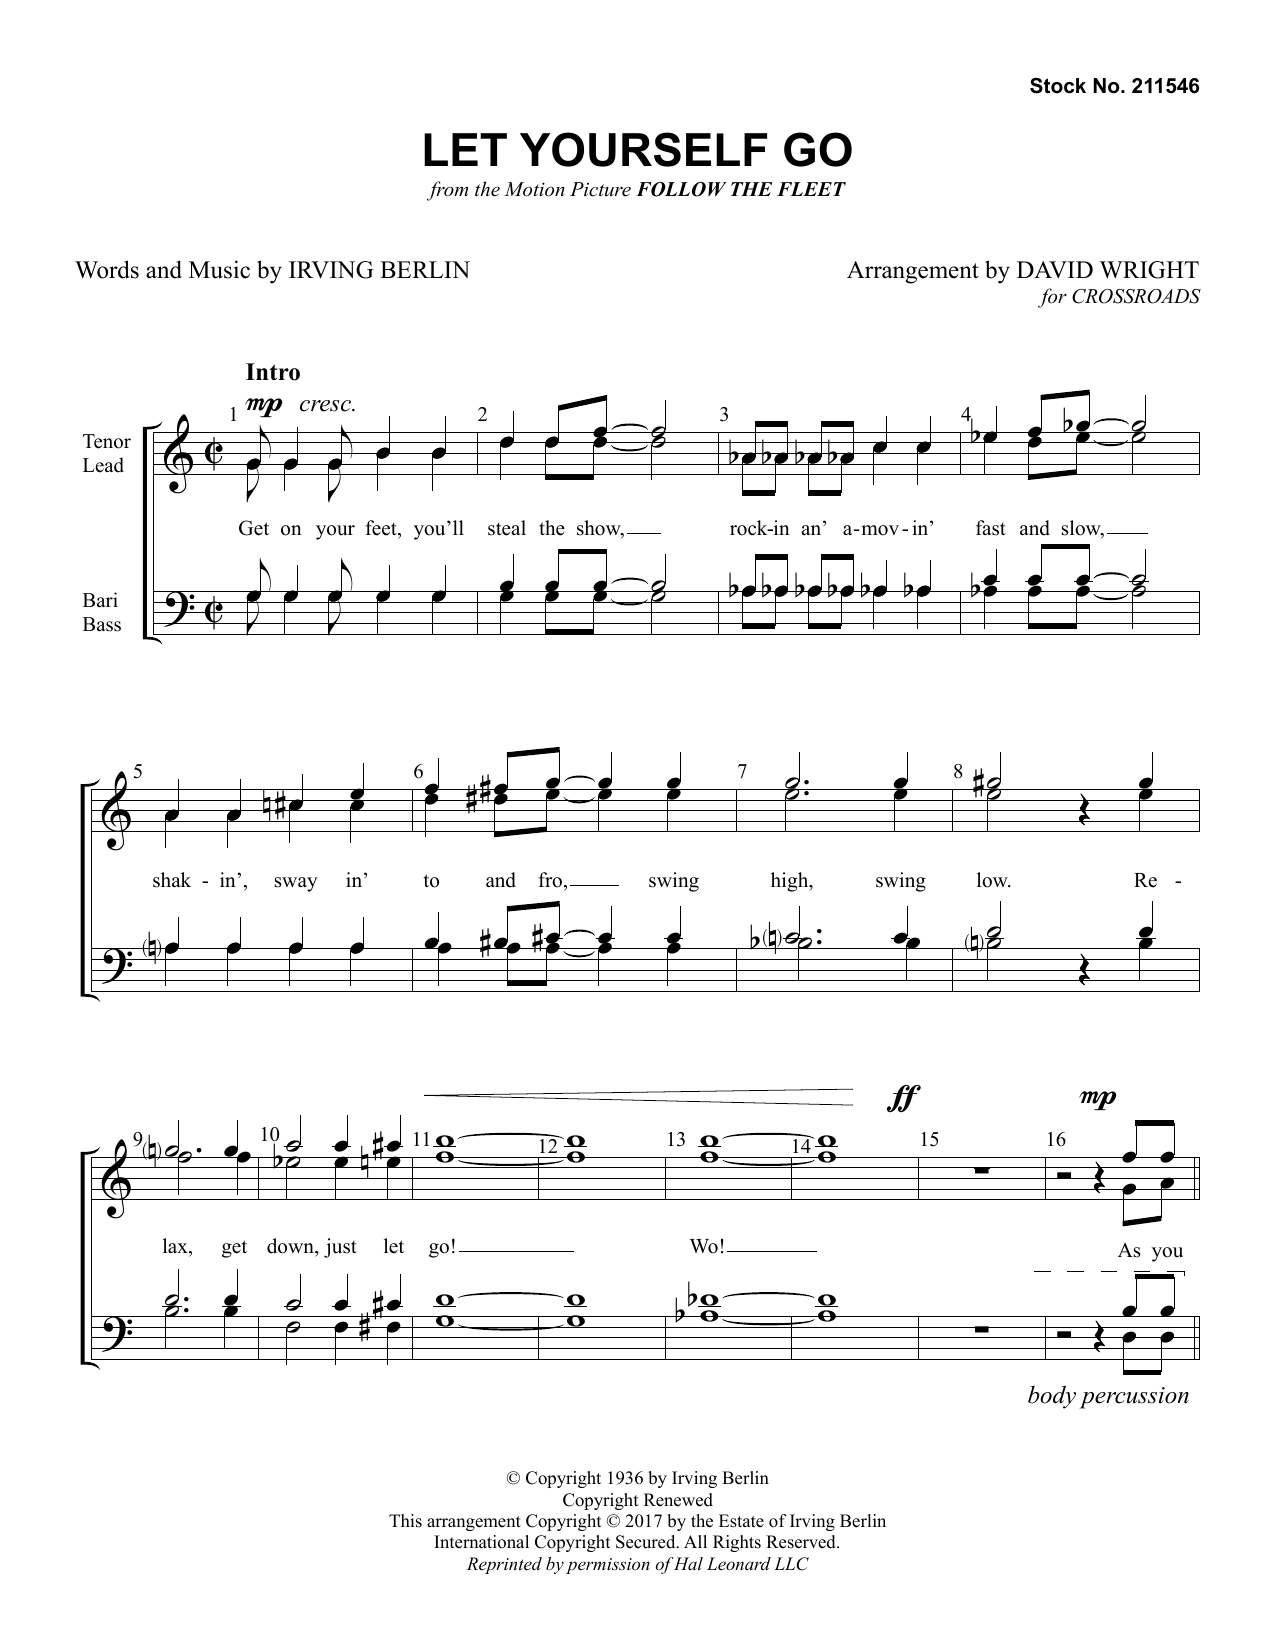 Download Crossroads Let Yourself Go (arr. David Wright) Sheet Music